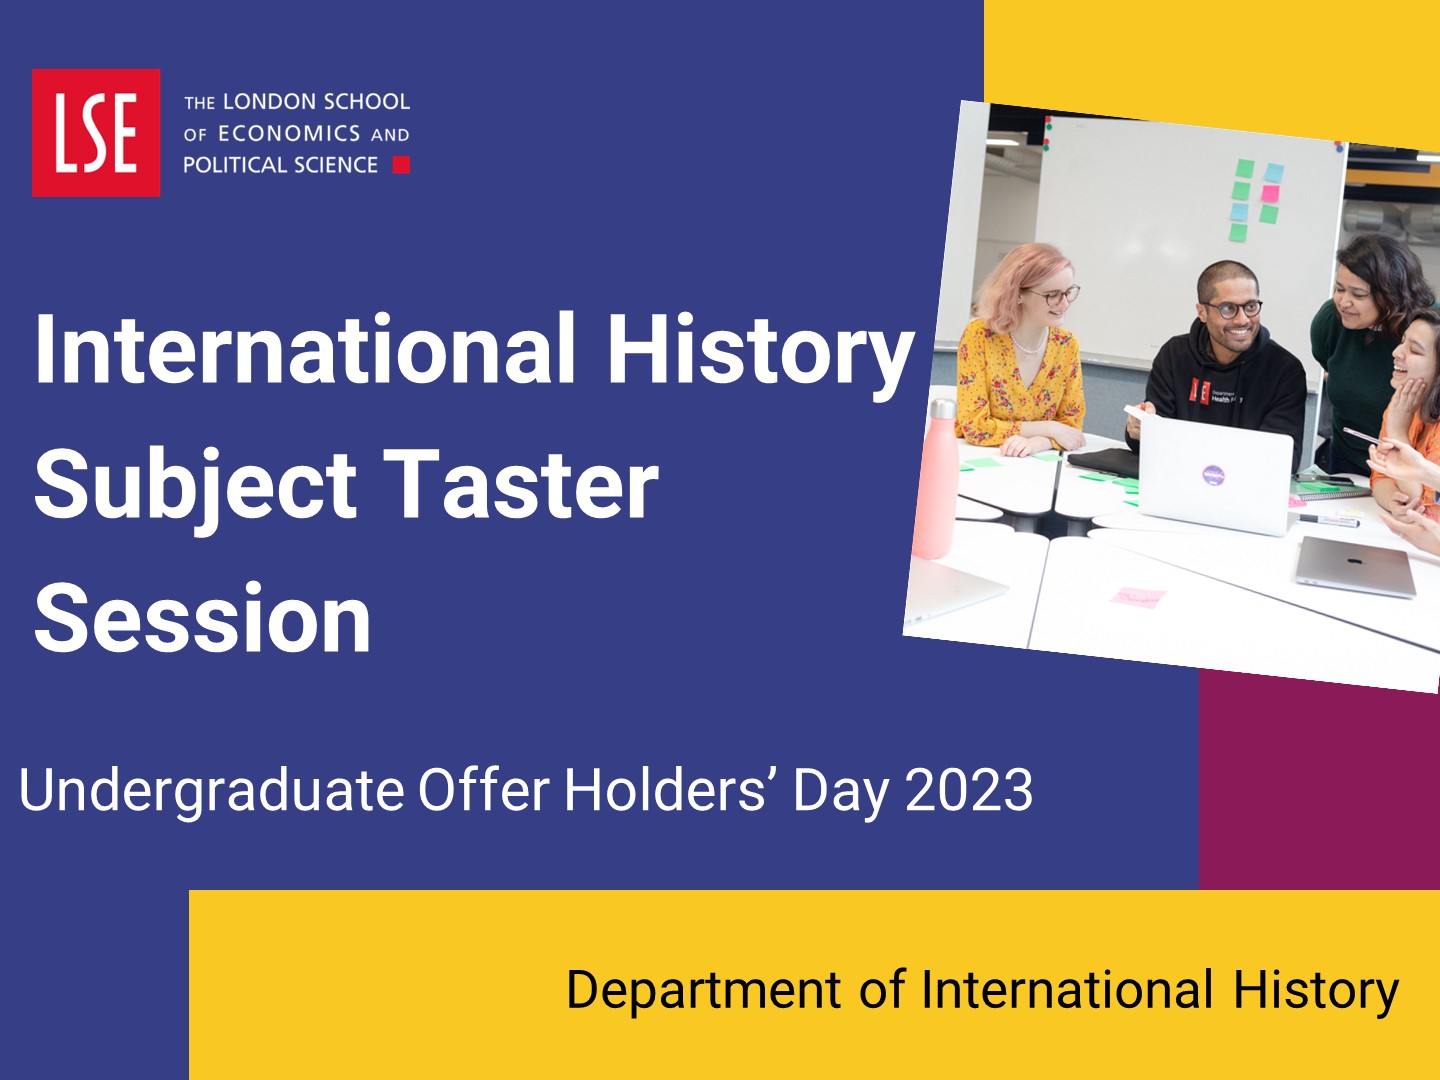 Watch the international history subject taster session